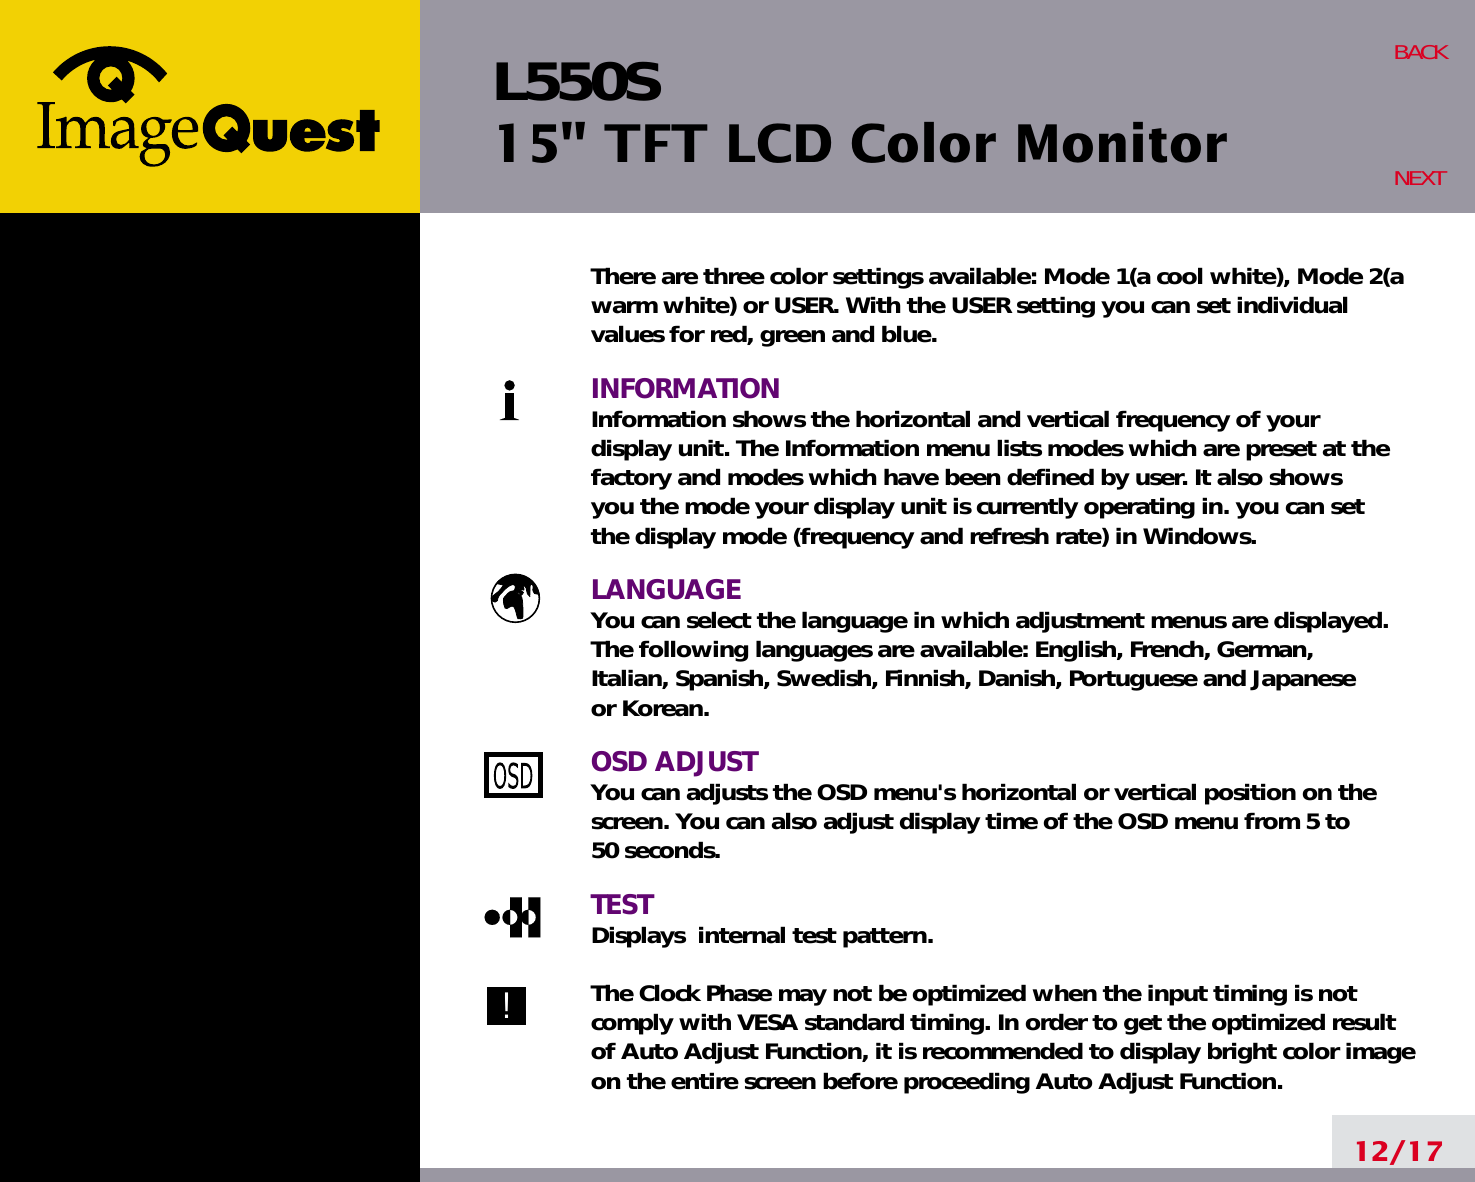 L550S15&quot; TFT LCD Color Monitor12/17BACKNEXTThere are three color settings available: Mode 1(a cool white), Mode 2(awarm white) or USER. With the USER setting you can set individualvalues for red, green and blue.INFORMATIONInformation shows the horizontal and vertical frequency of your display unit. The Information menu lists modes which are preset at the factory and modes which have been defined by user. It also shows you the mode your display unit is currently operating in. you can set the display mode (frequency and refresh rate) in Windows.LANGUAGEYou can select the language in which adjustment menus are displayed. The following languages are available: English, French, German, Italian, Spanish, Swedish, Finnish, Danish, Portuguese and Japanese or Korean.OSD ADJUSTYou can adjusts the OSD menu&apos;s horizontal or vertical position on the screen. You can also adjust display time of the OSD menu from 5 to 50 seconds.TESTDisplays  internal test pattern.The Clock Phase may not be optimized when the input timing is notcomply with VESA standard timing. In order to get the optimized resultof Auto Adjust Function, it is recommended to display bright color imageon the entire screen before proceeding Auto Adjust Function.!